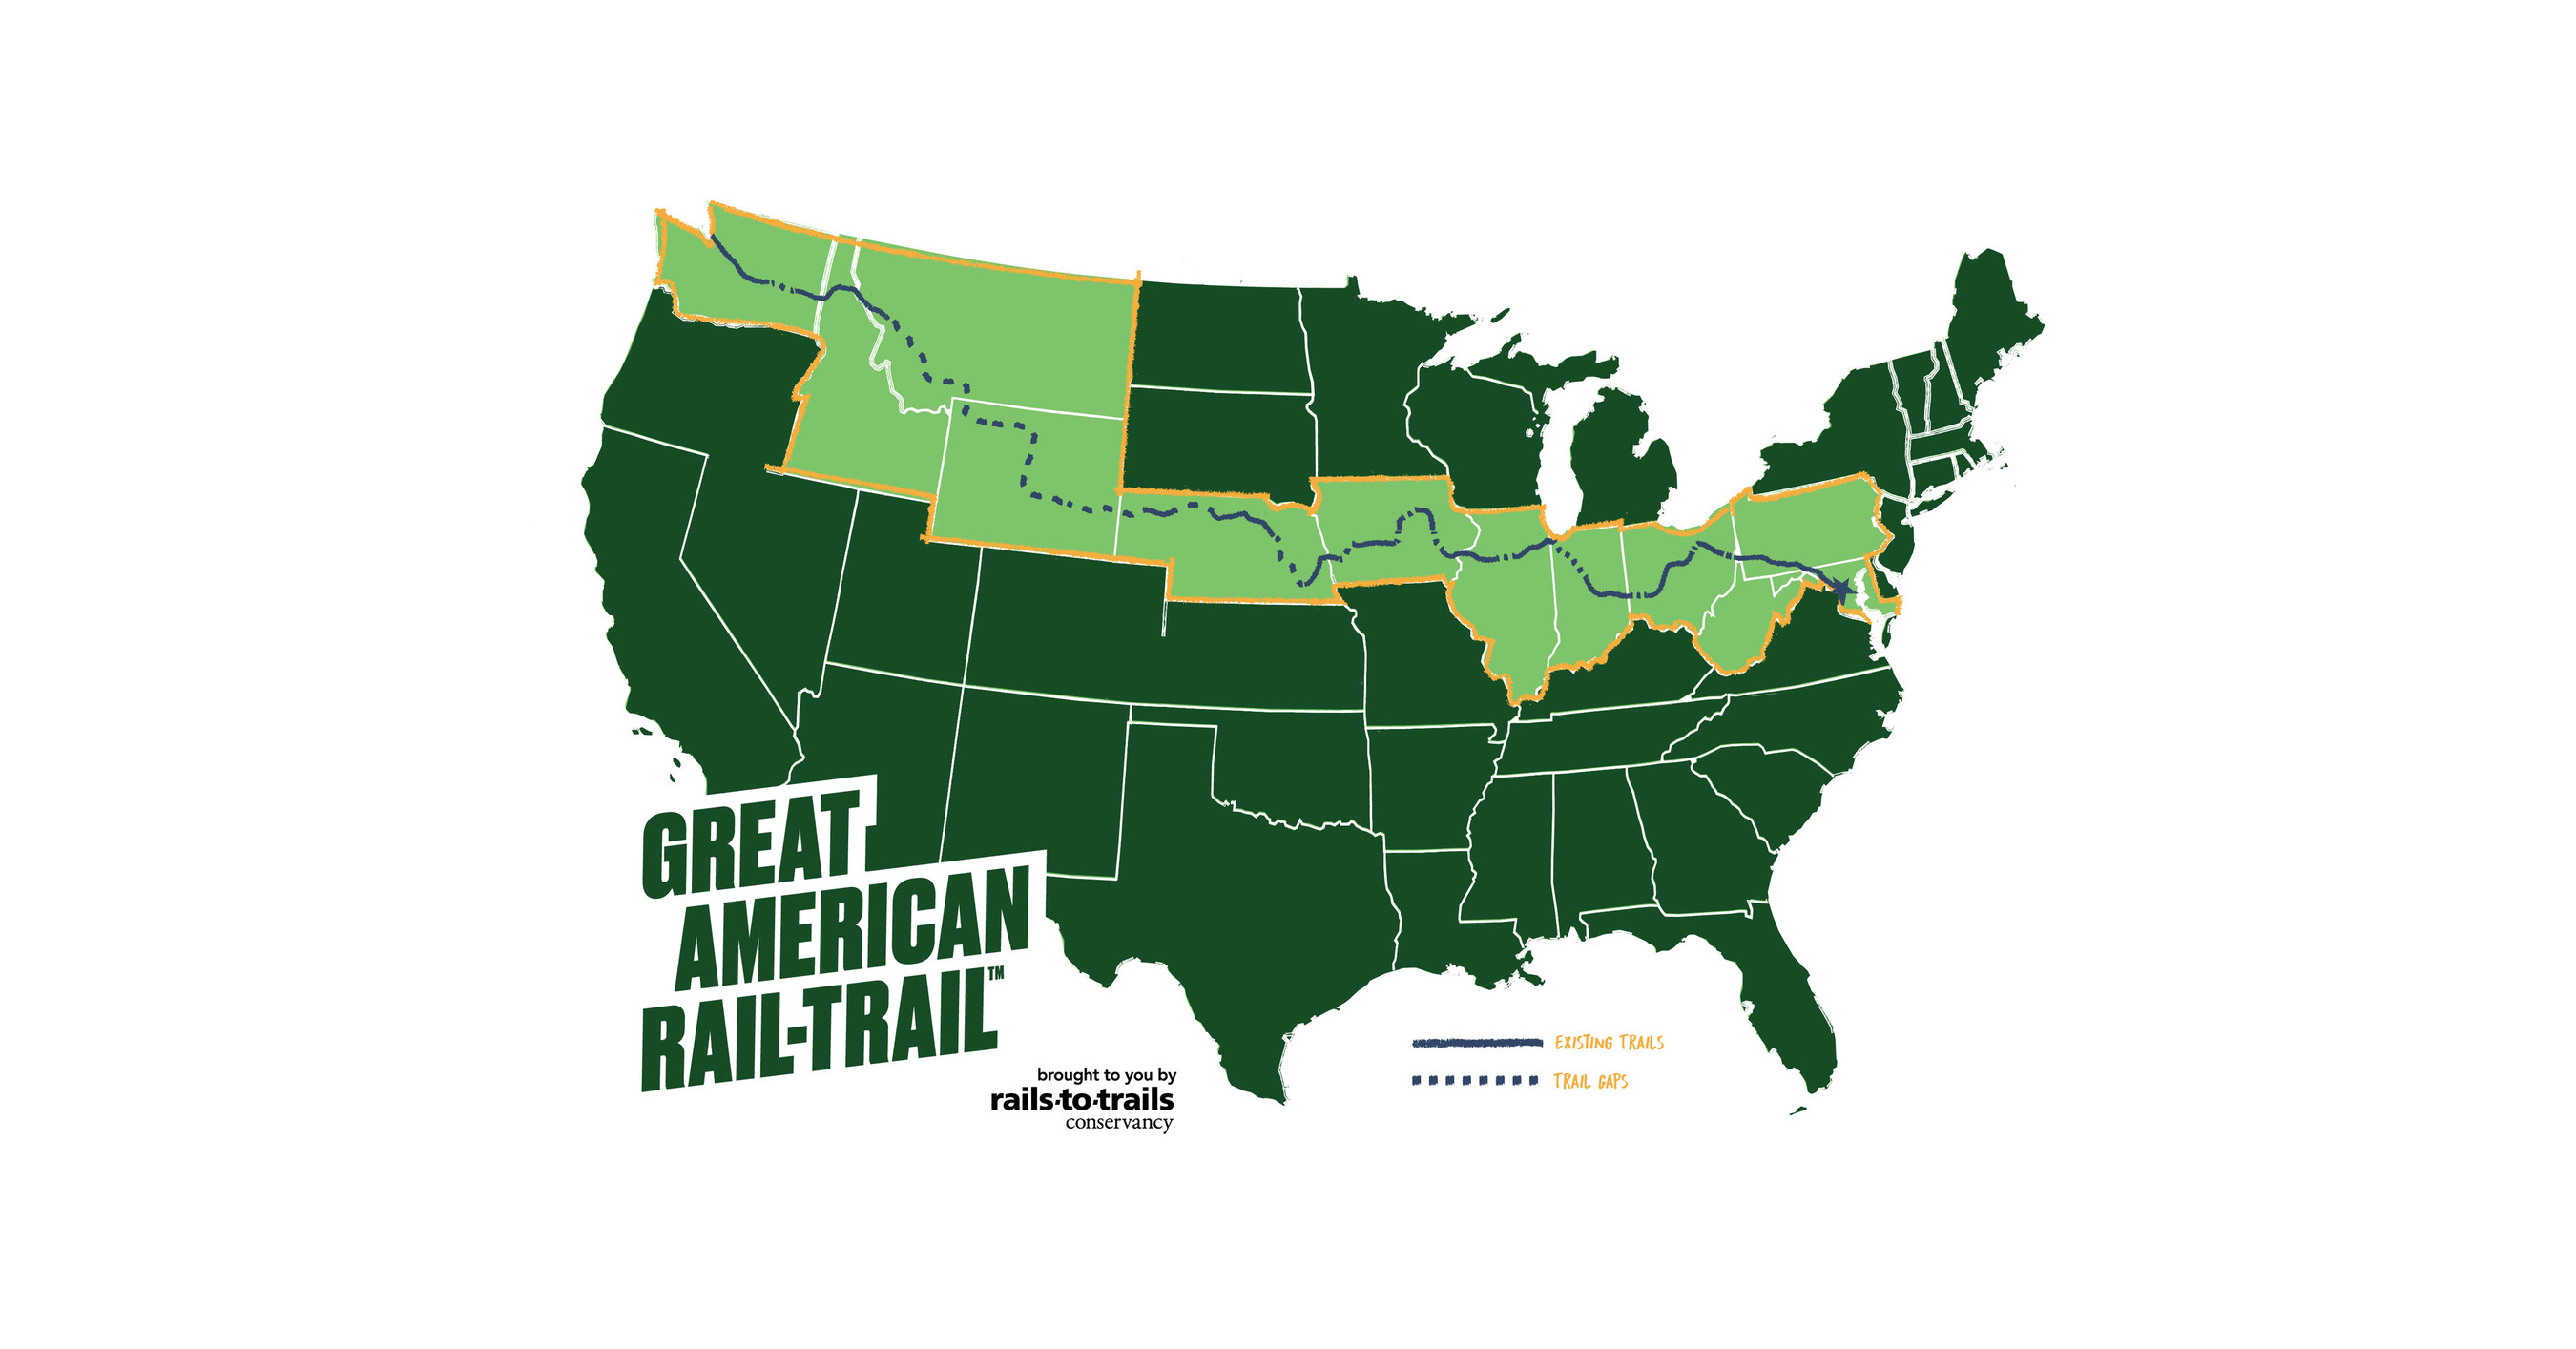 New Miles Added To Great American RailTrail, First In Ohio Since Route